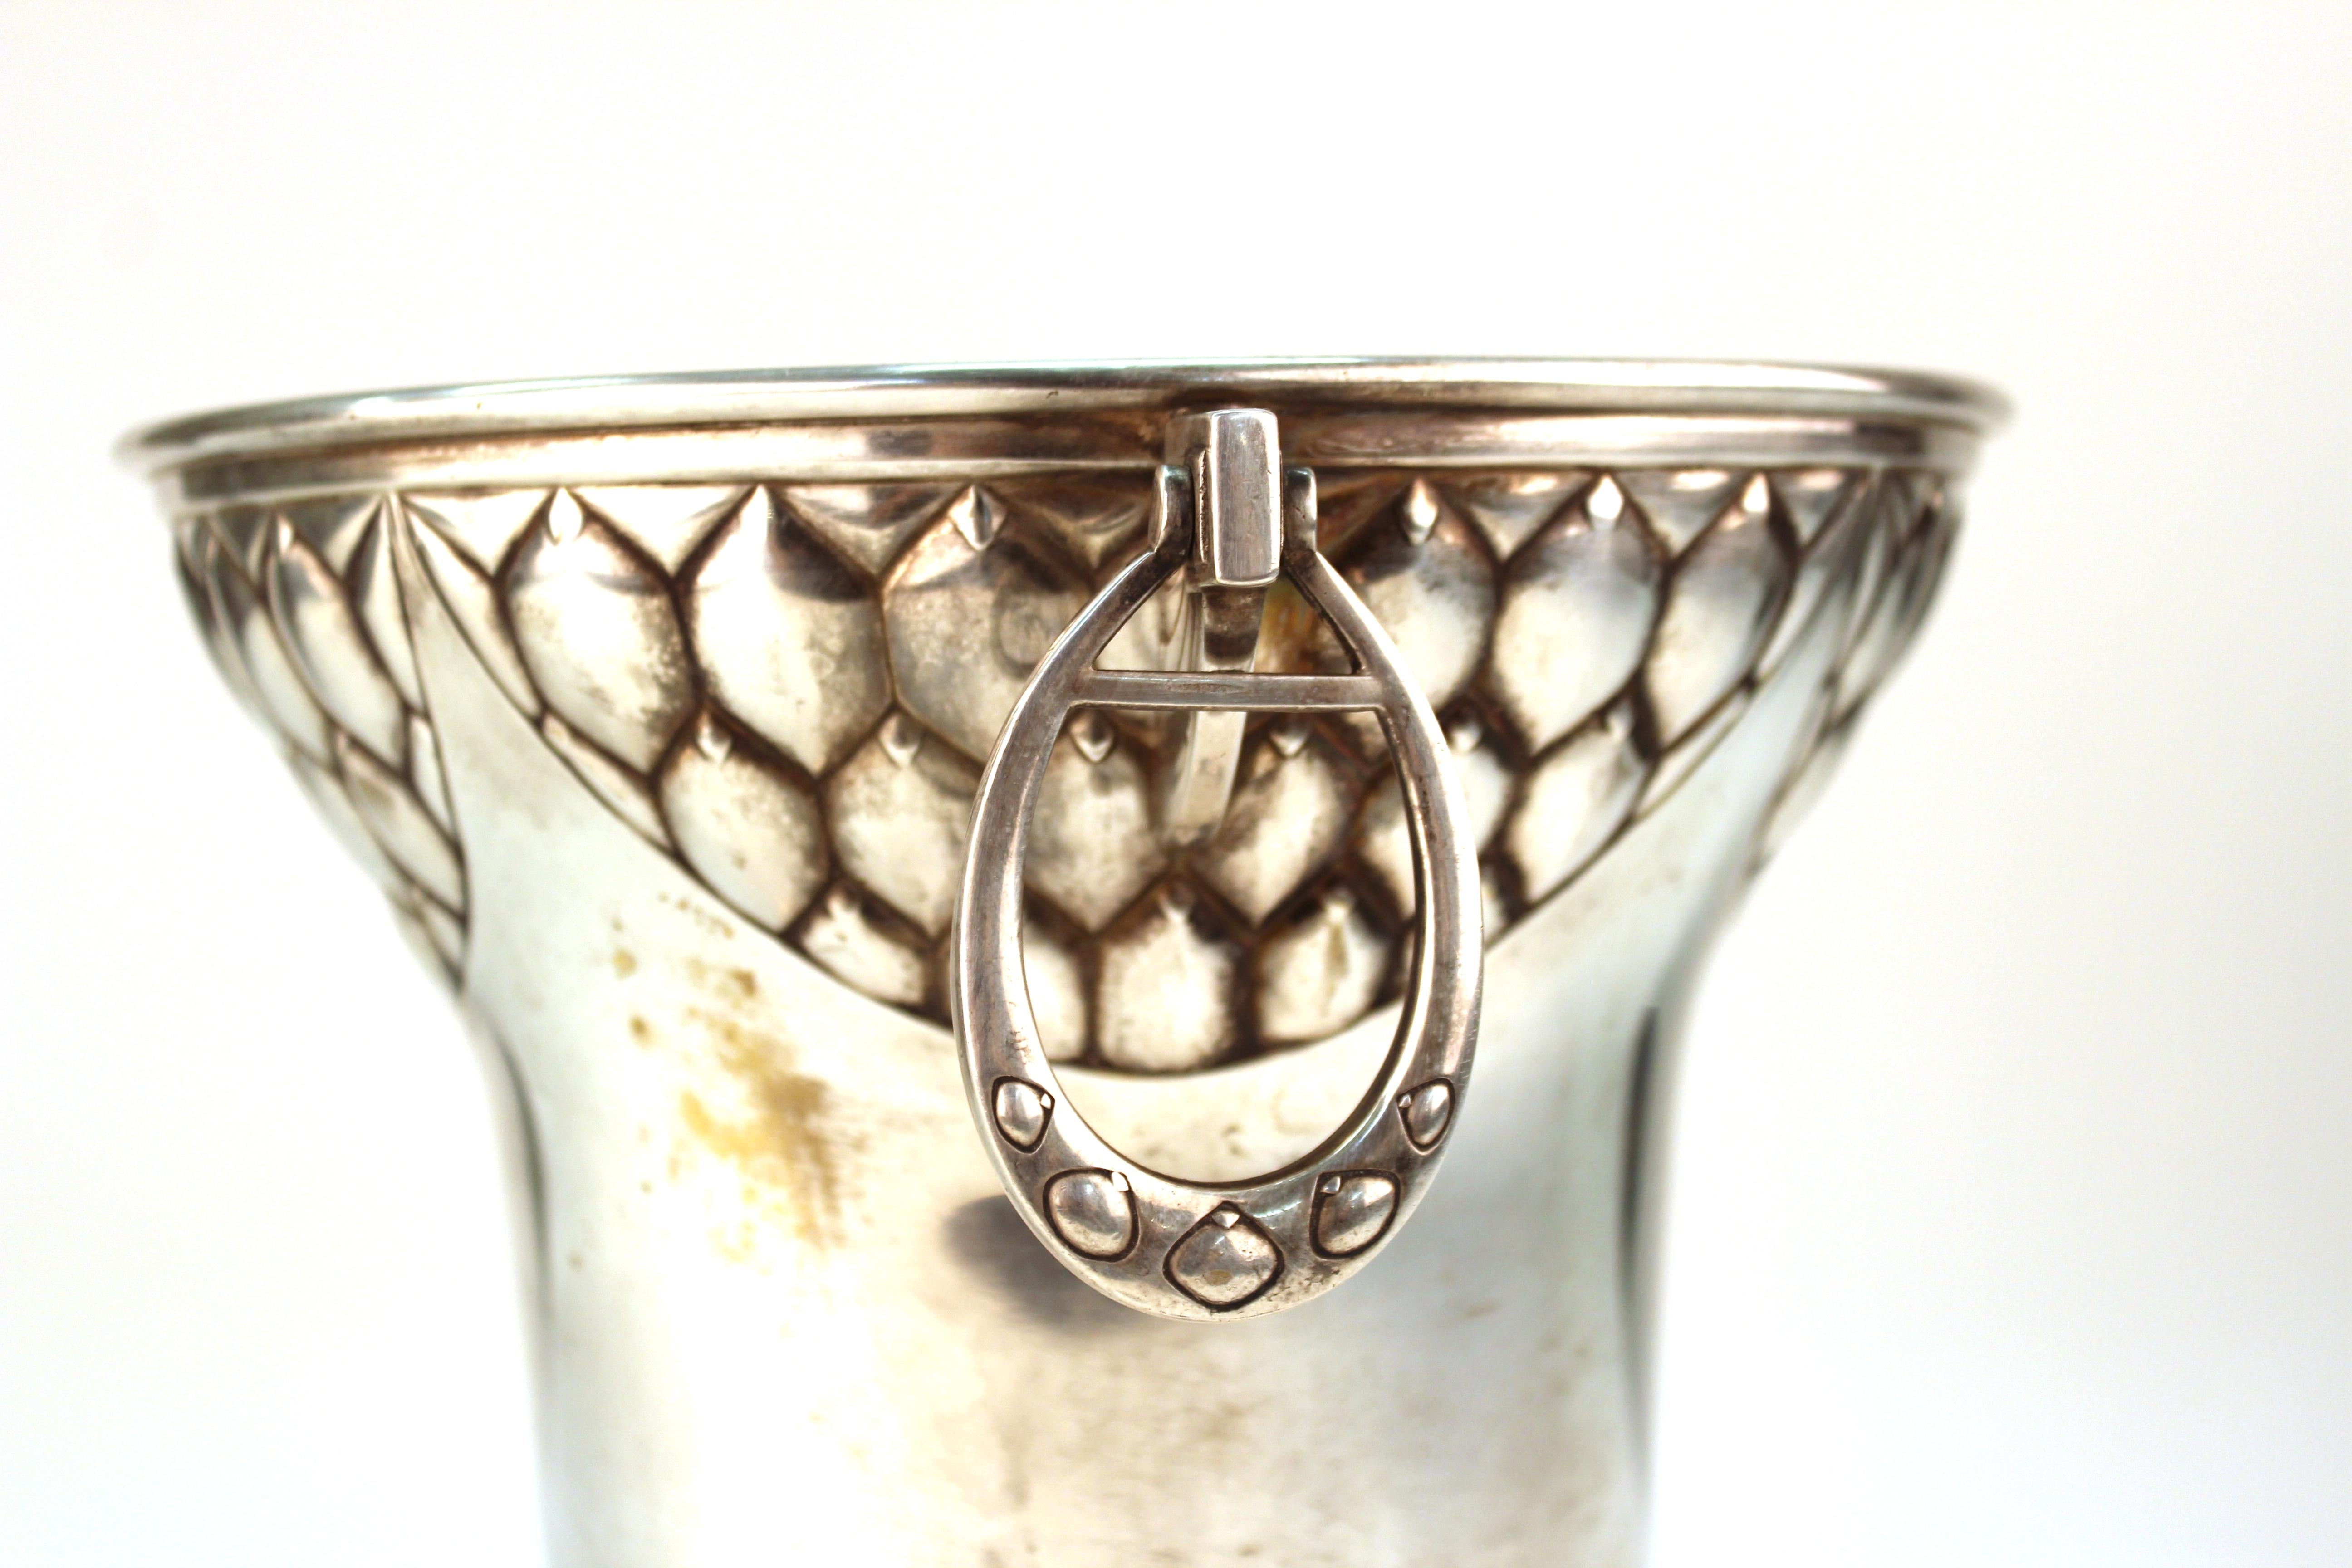 20th Century German WMF Secessionist Silver Plated Ice Bucket